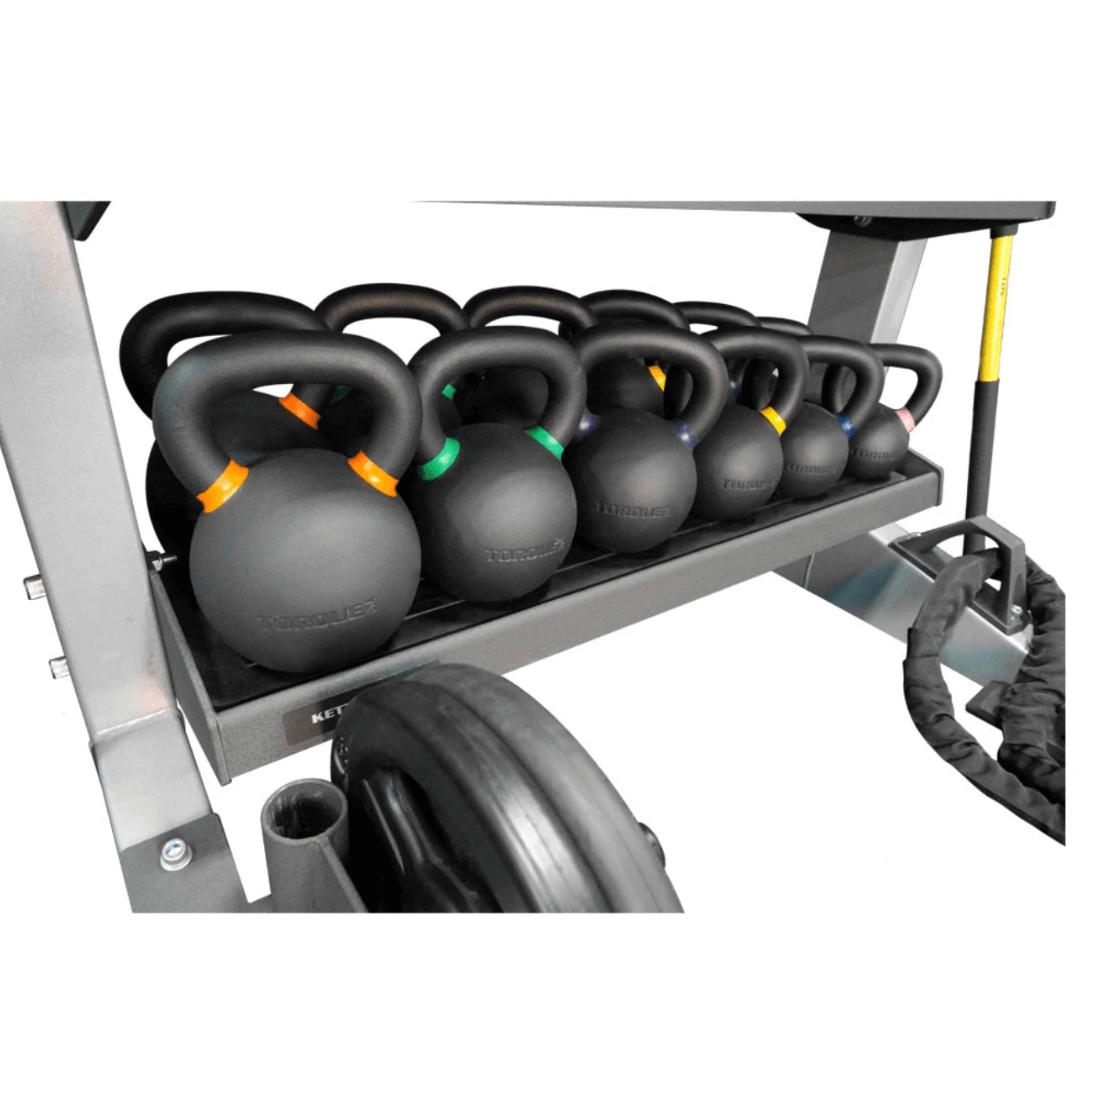 Torque 4 Foot (1.2M) Kettlebell Package - Competitors Outlet